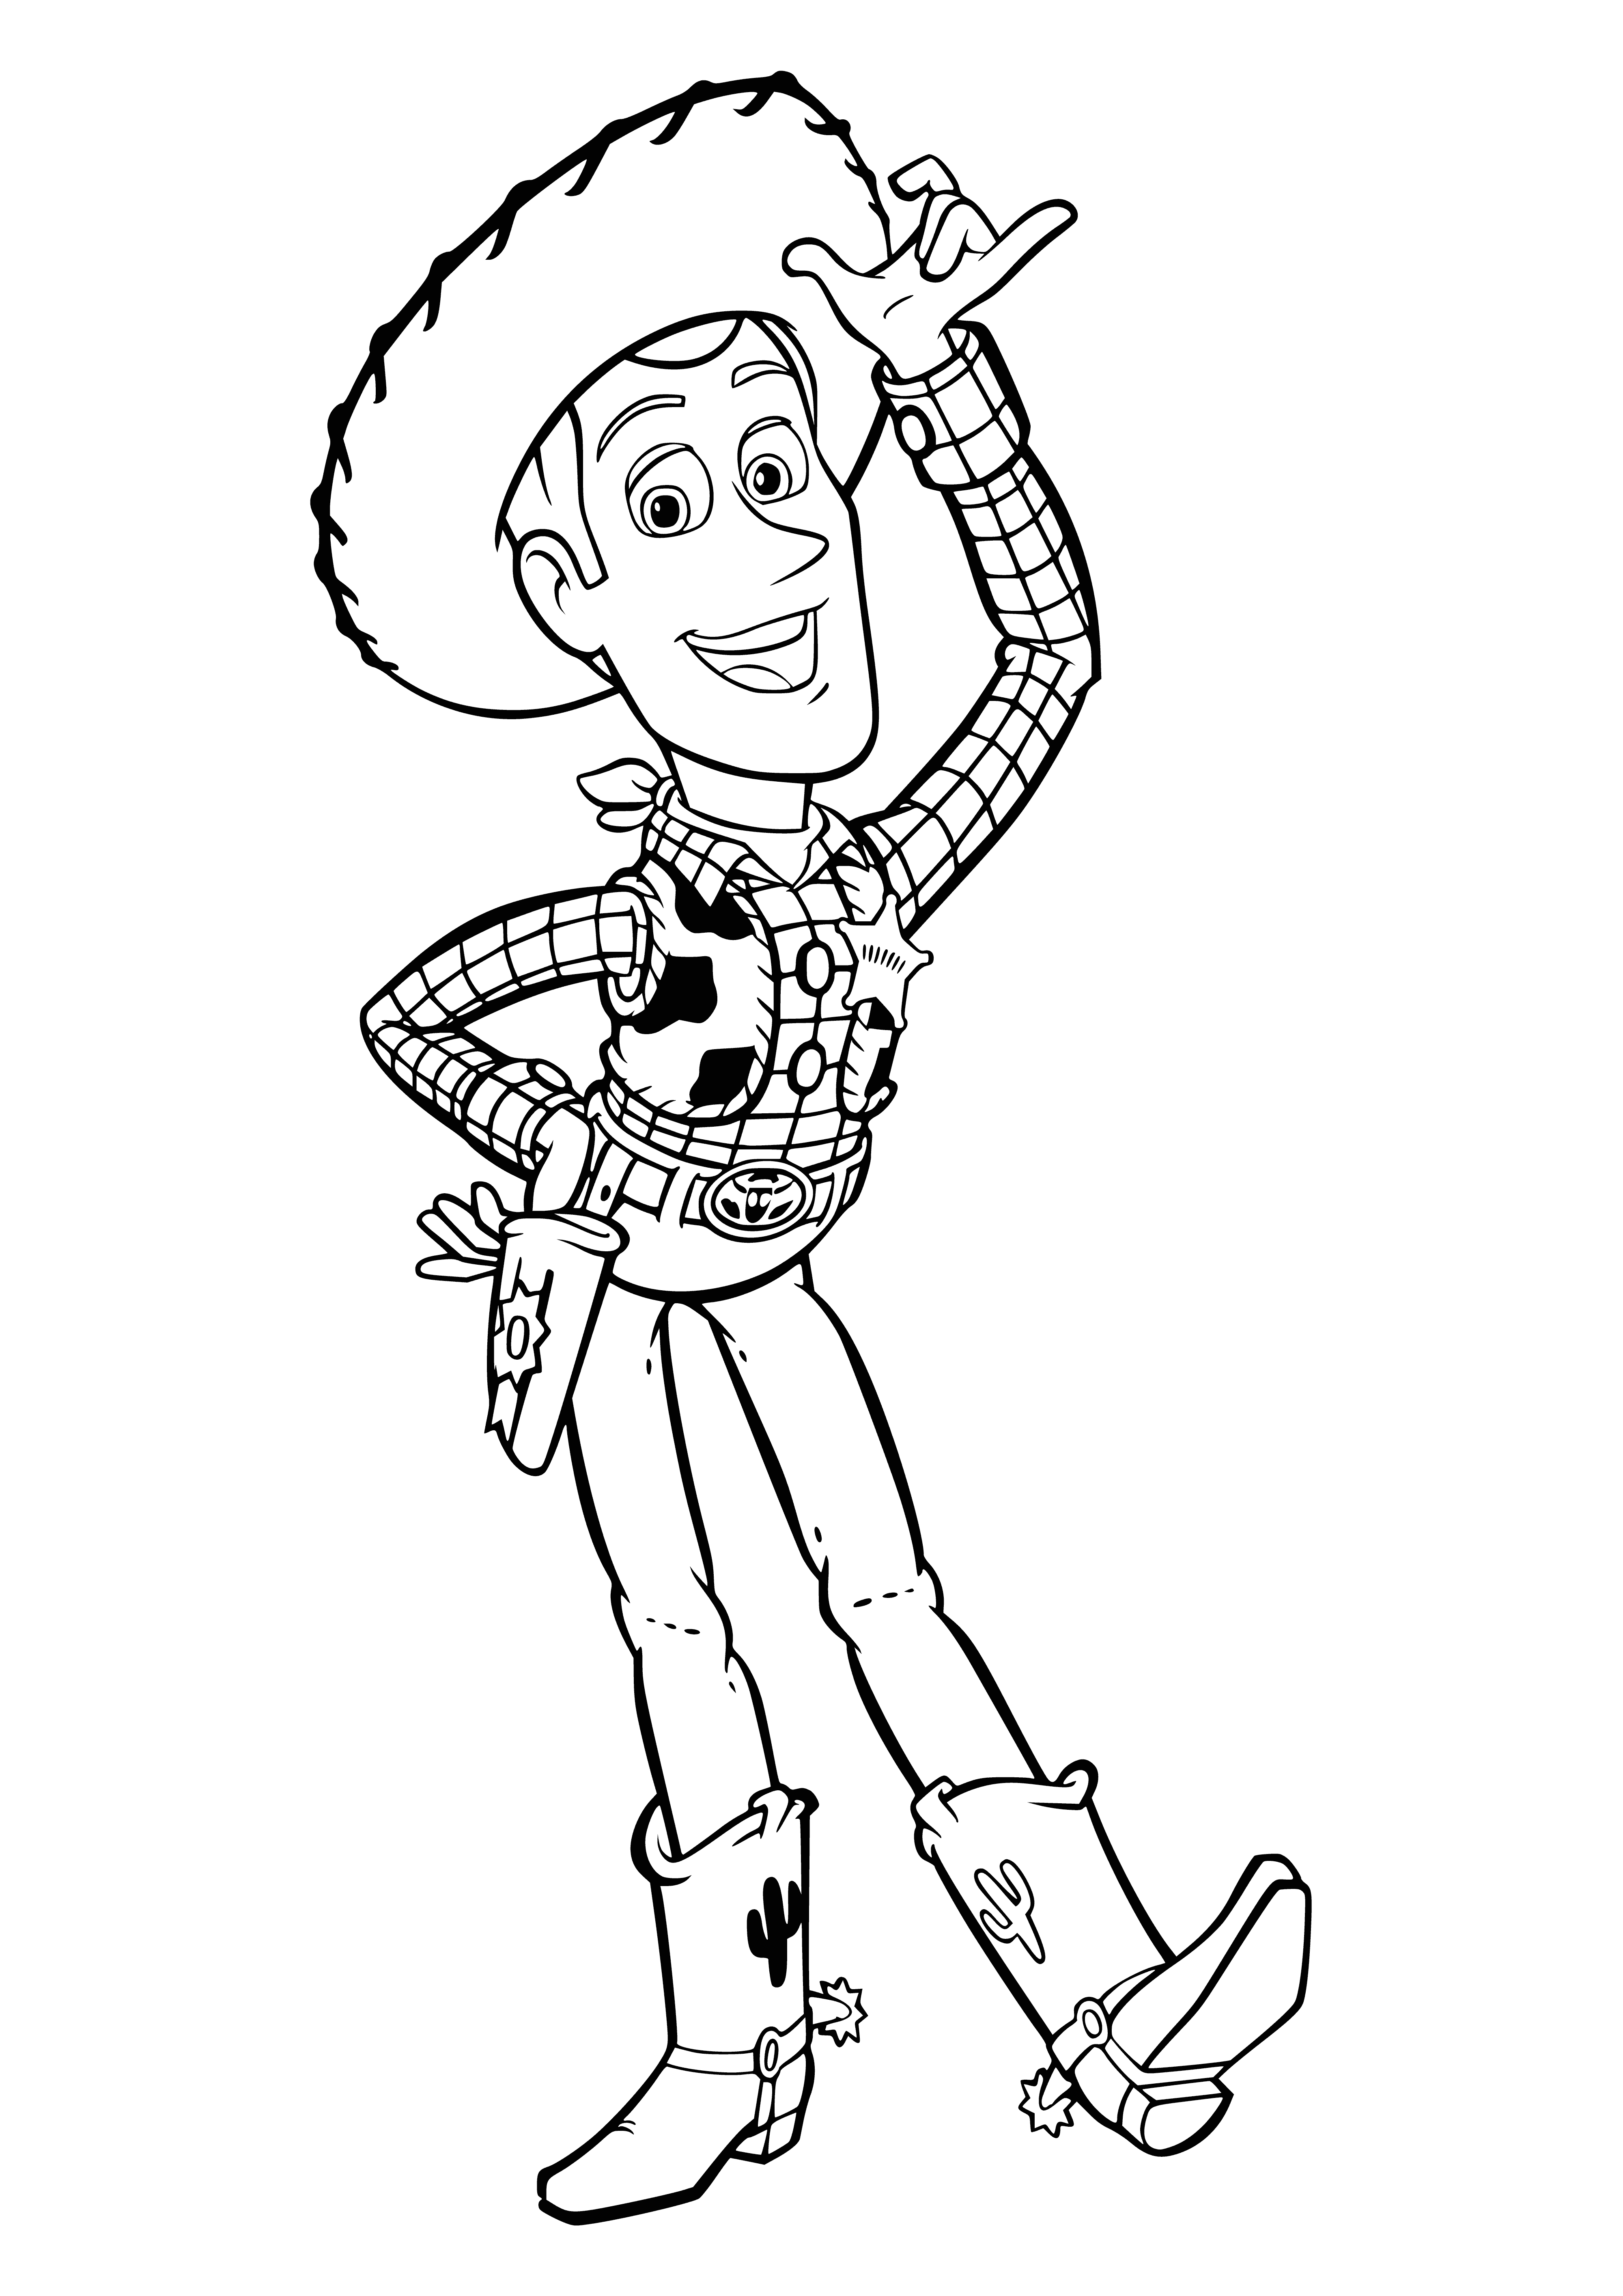 Sheriff Woody coloring page